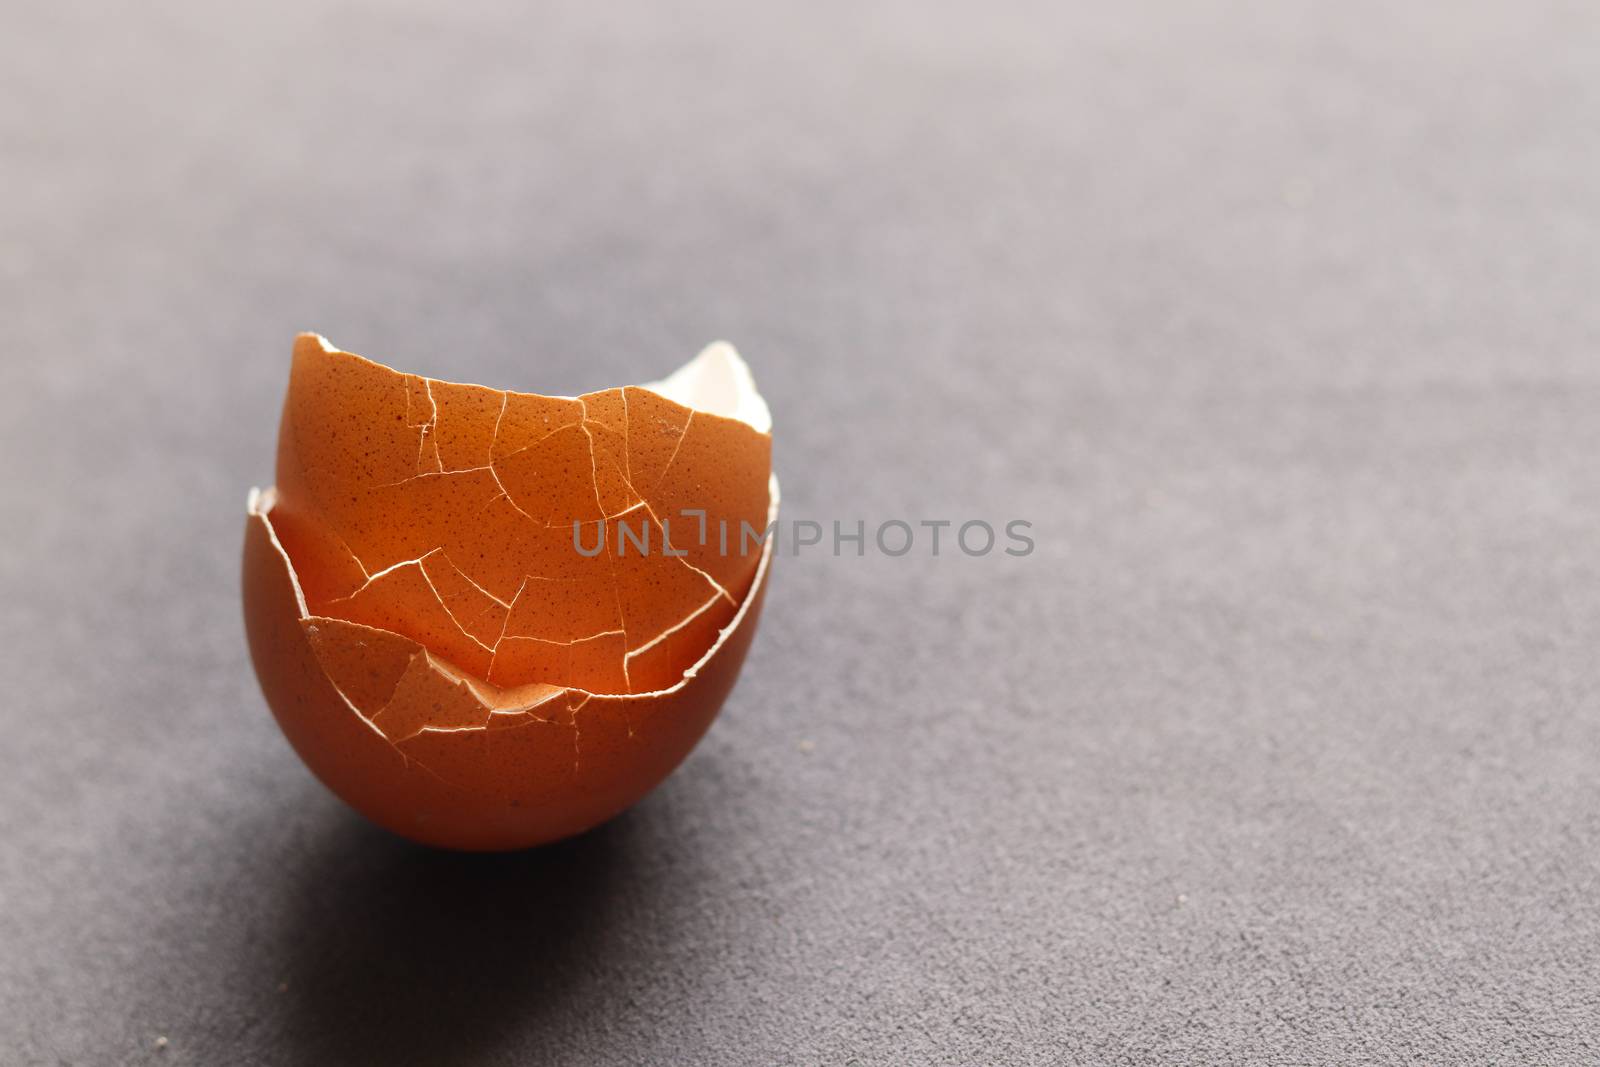 A couple of broken eggshells against a gray colored background